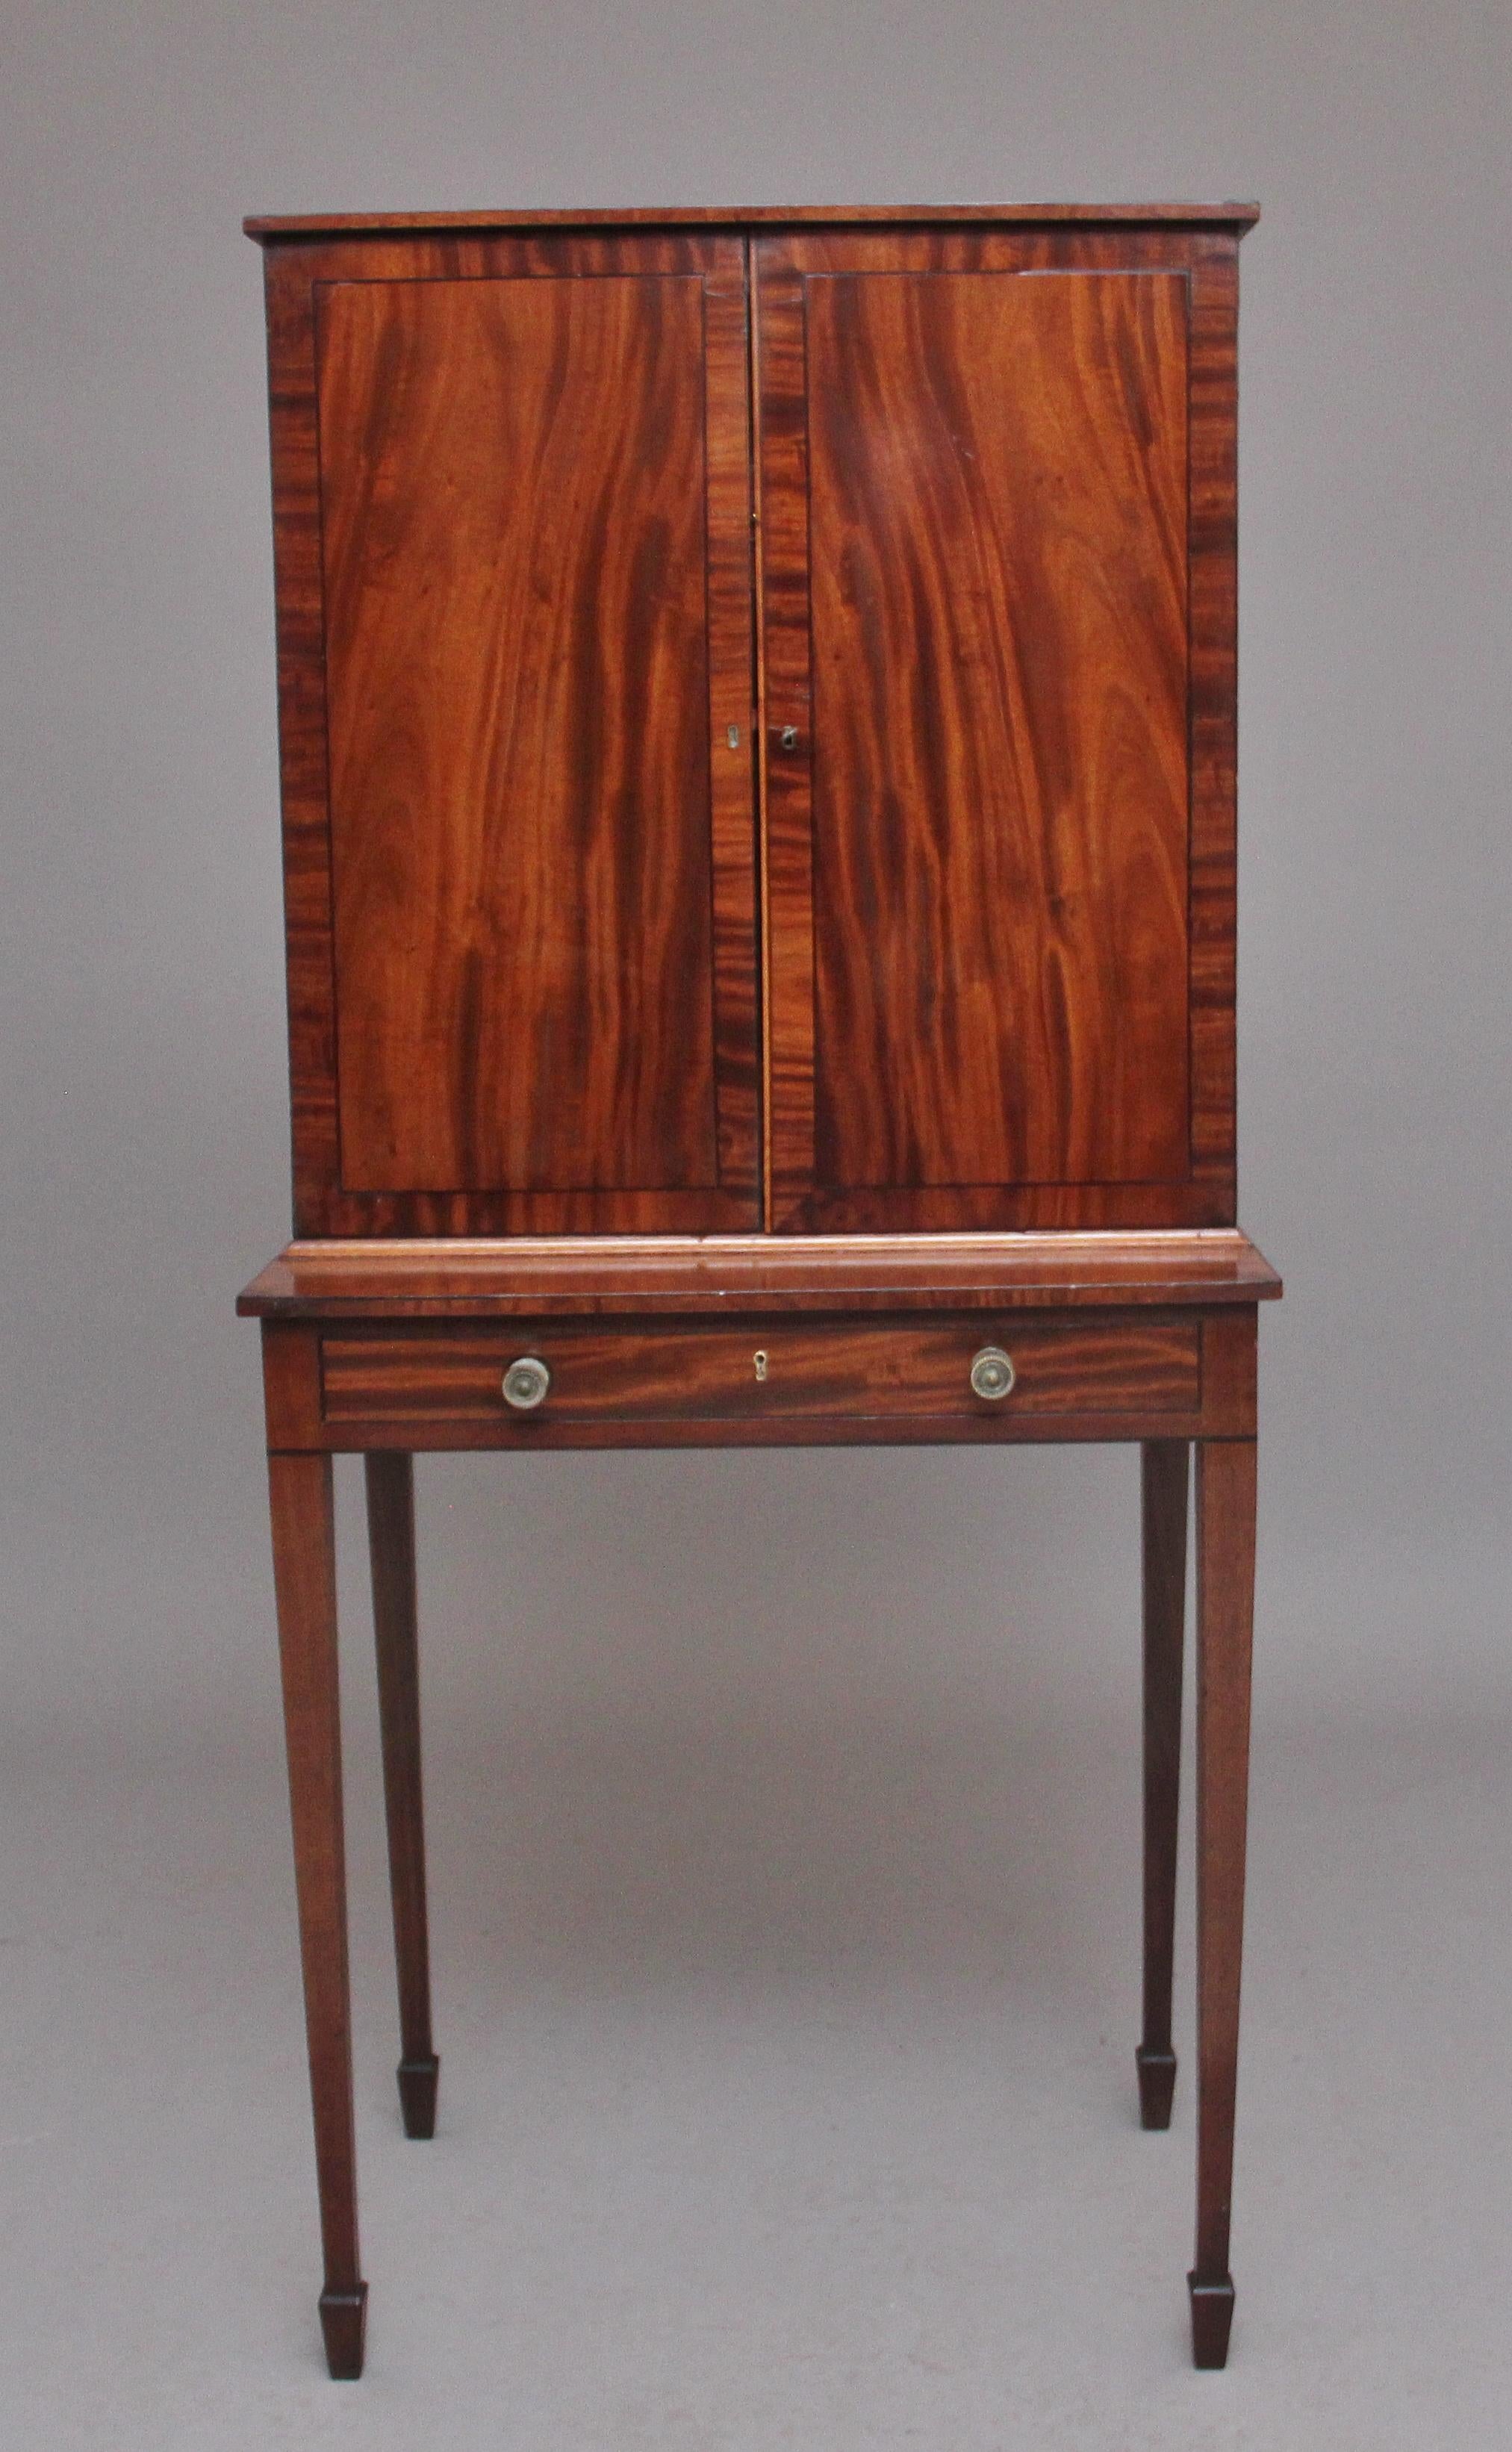 Early 19th century mahogany collectors cabinet, two flame mahogany and crossbanded doors opening to reveal six compartment spaces at the top and ten oak lined drawers below which consist of three drawers at the top, six drawers in the centre and a